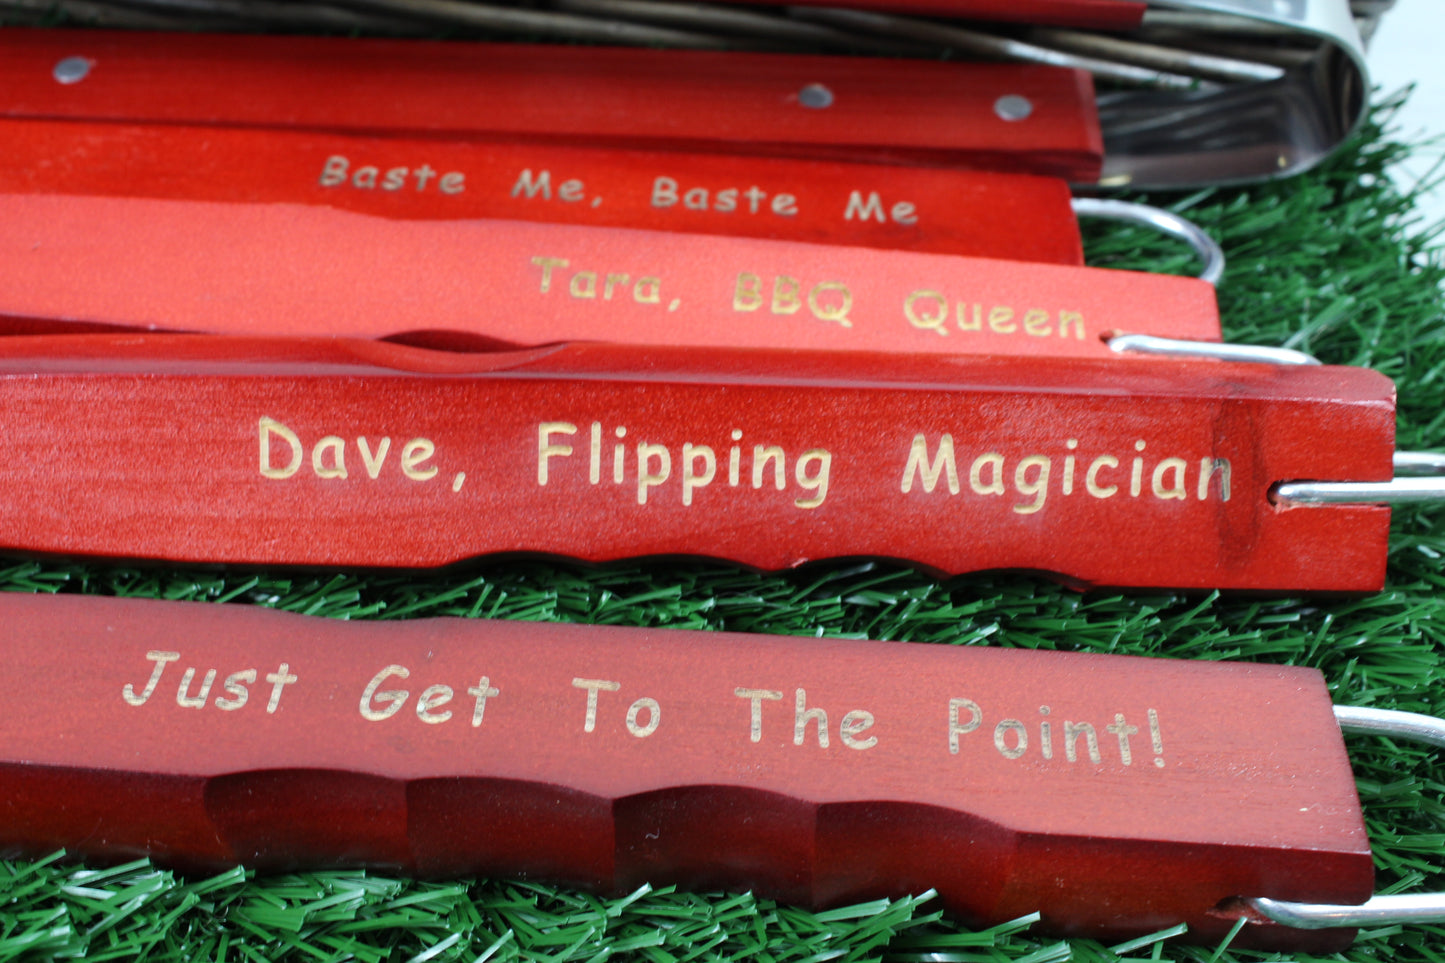 5 Wooden handled personalised barbecue tool that says "Baste Me, Baste Me" "Tara, BBQ Queen" "Dave, Flipping Magician" "Just Get To The Point"